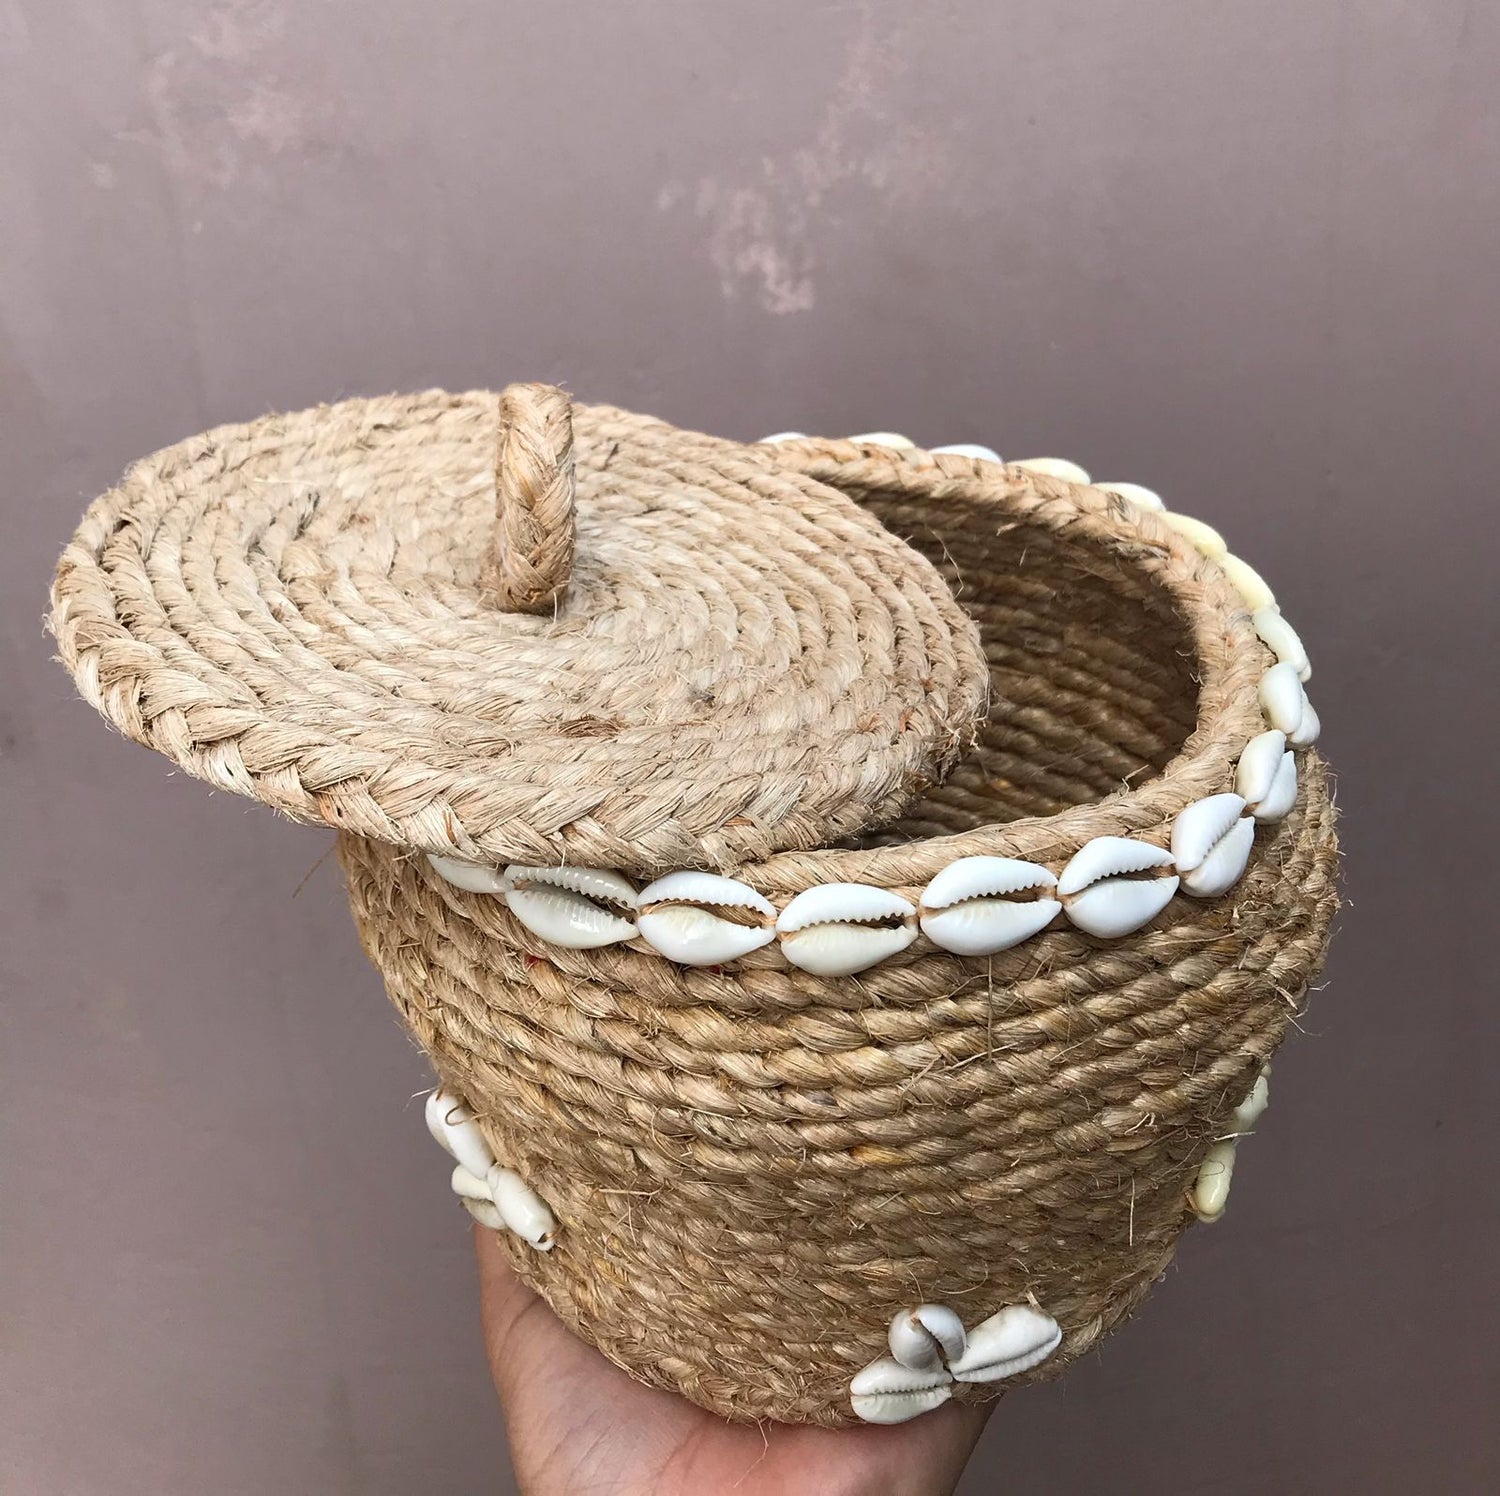 Banana fibre Basket With Lid & Cowrie Shell